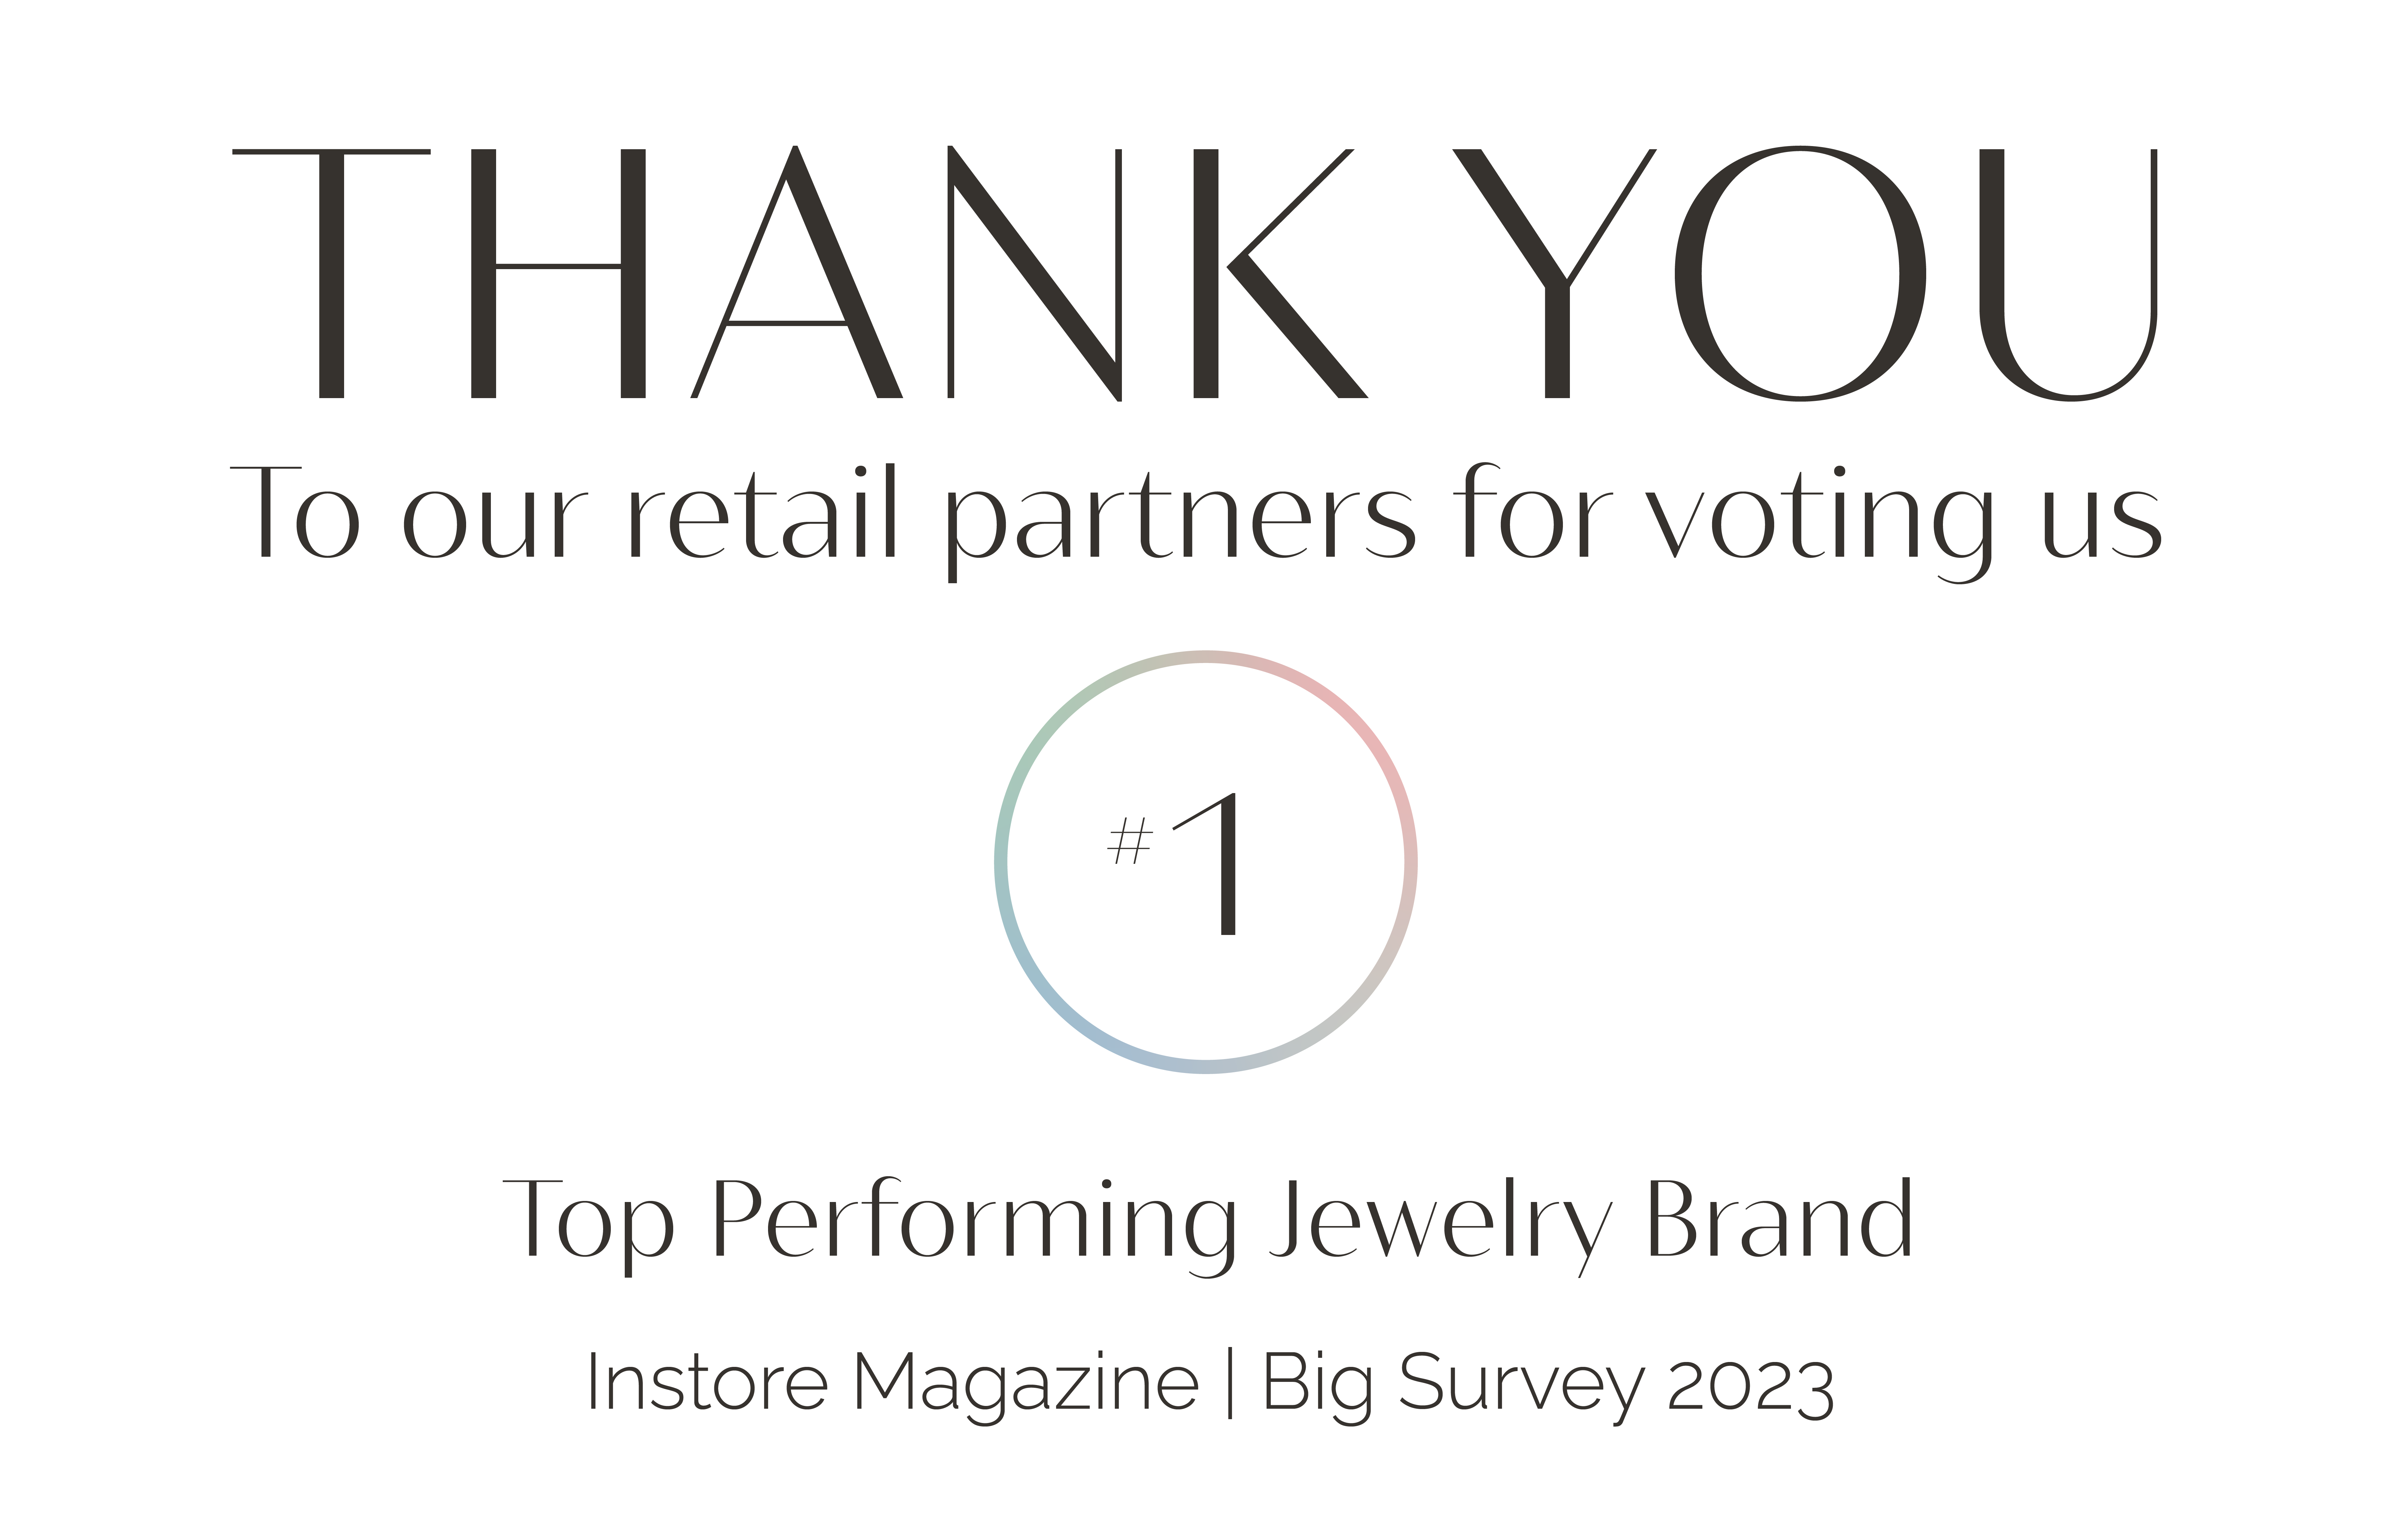 Top Performing Jewelry Brand